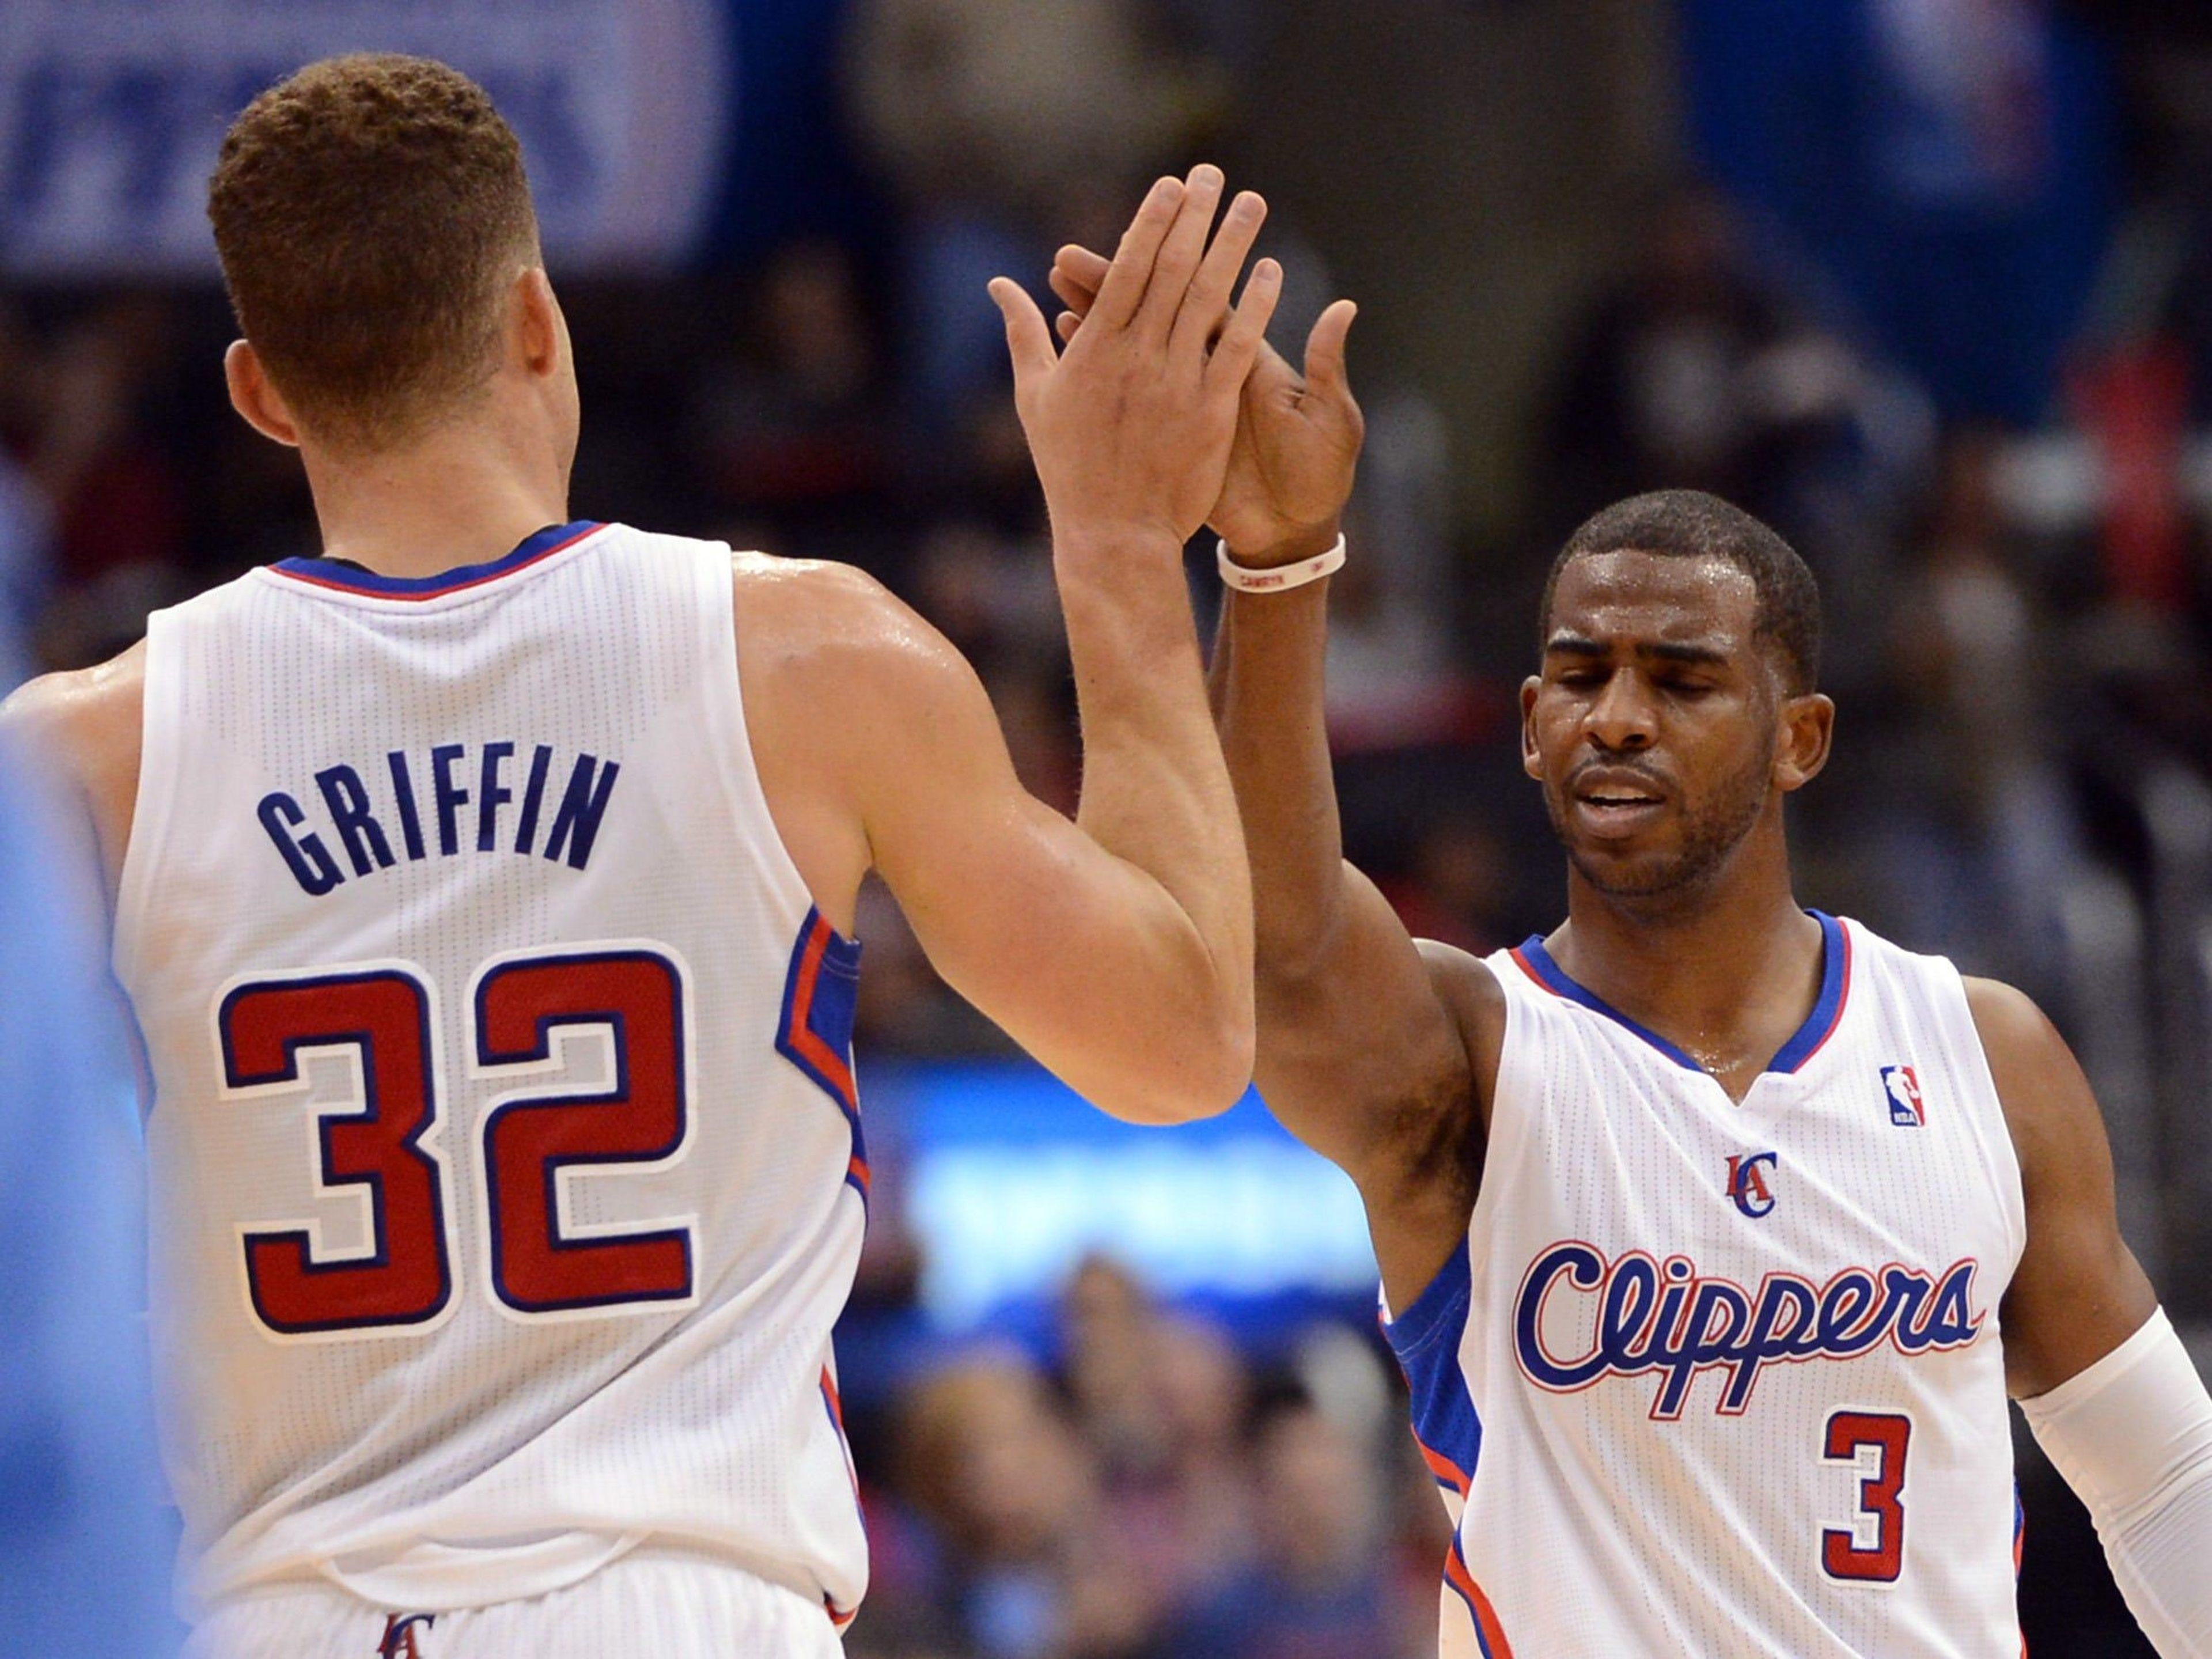 LA Clippers players high-five each other.